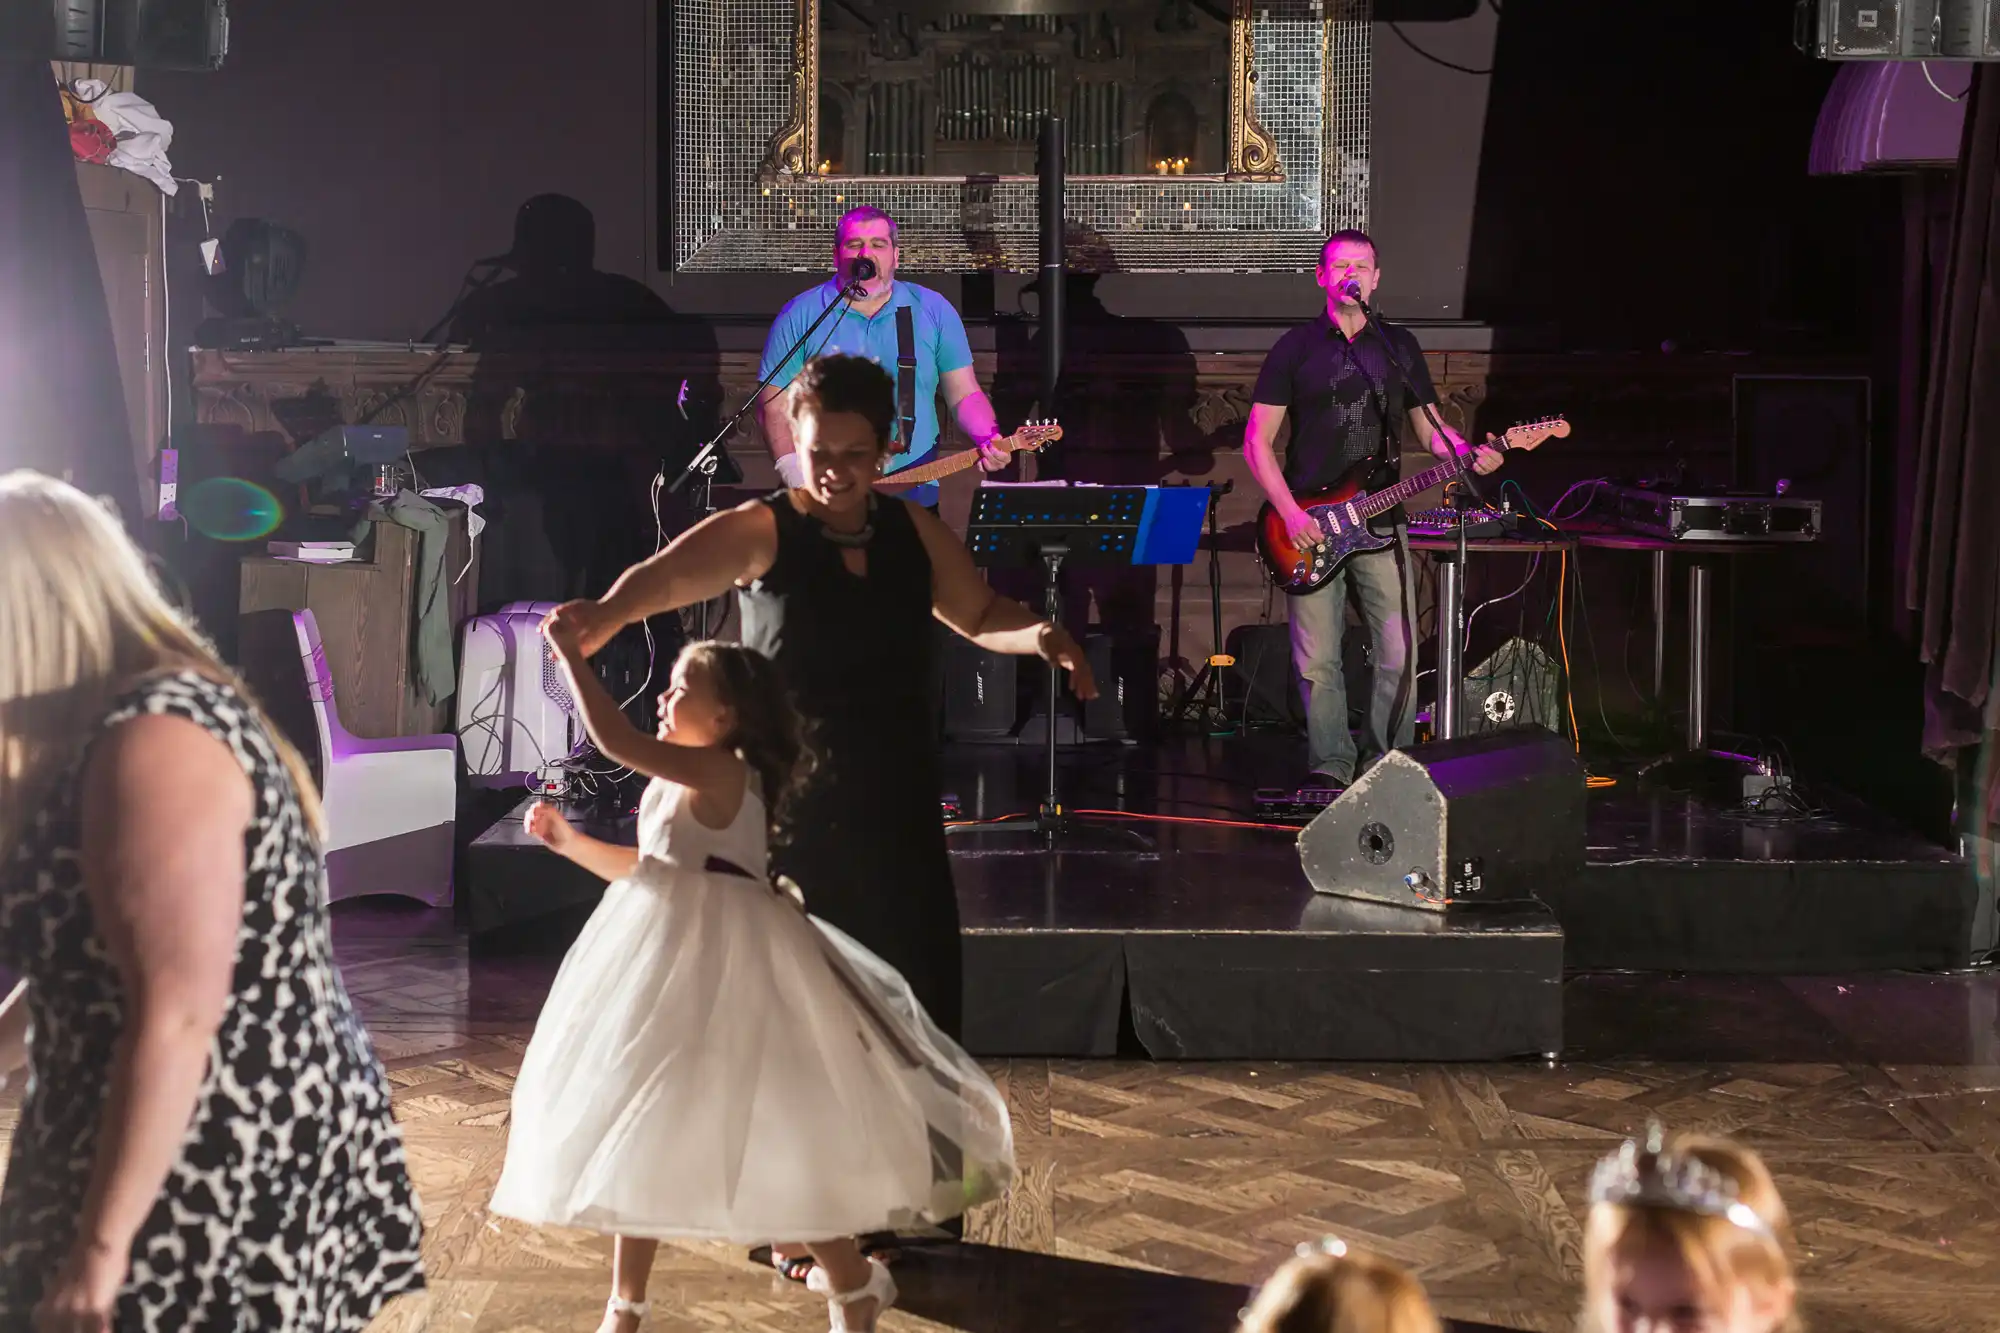 A woman and a young girl dance joyfully at a wedding reception while a band performs on stage in the background.